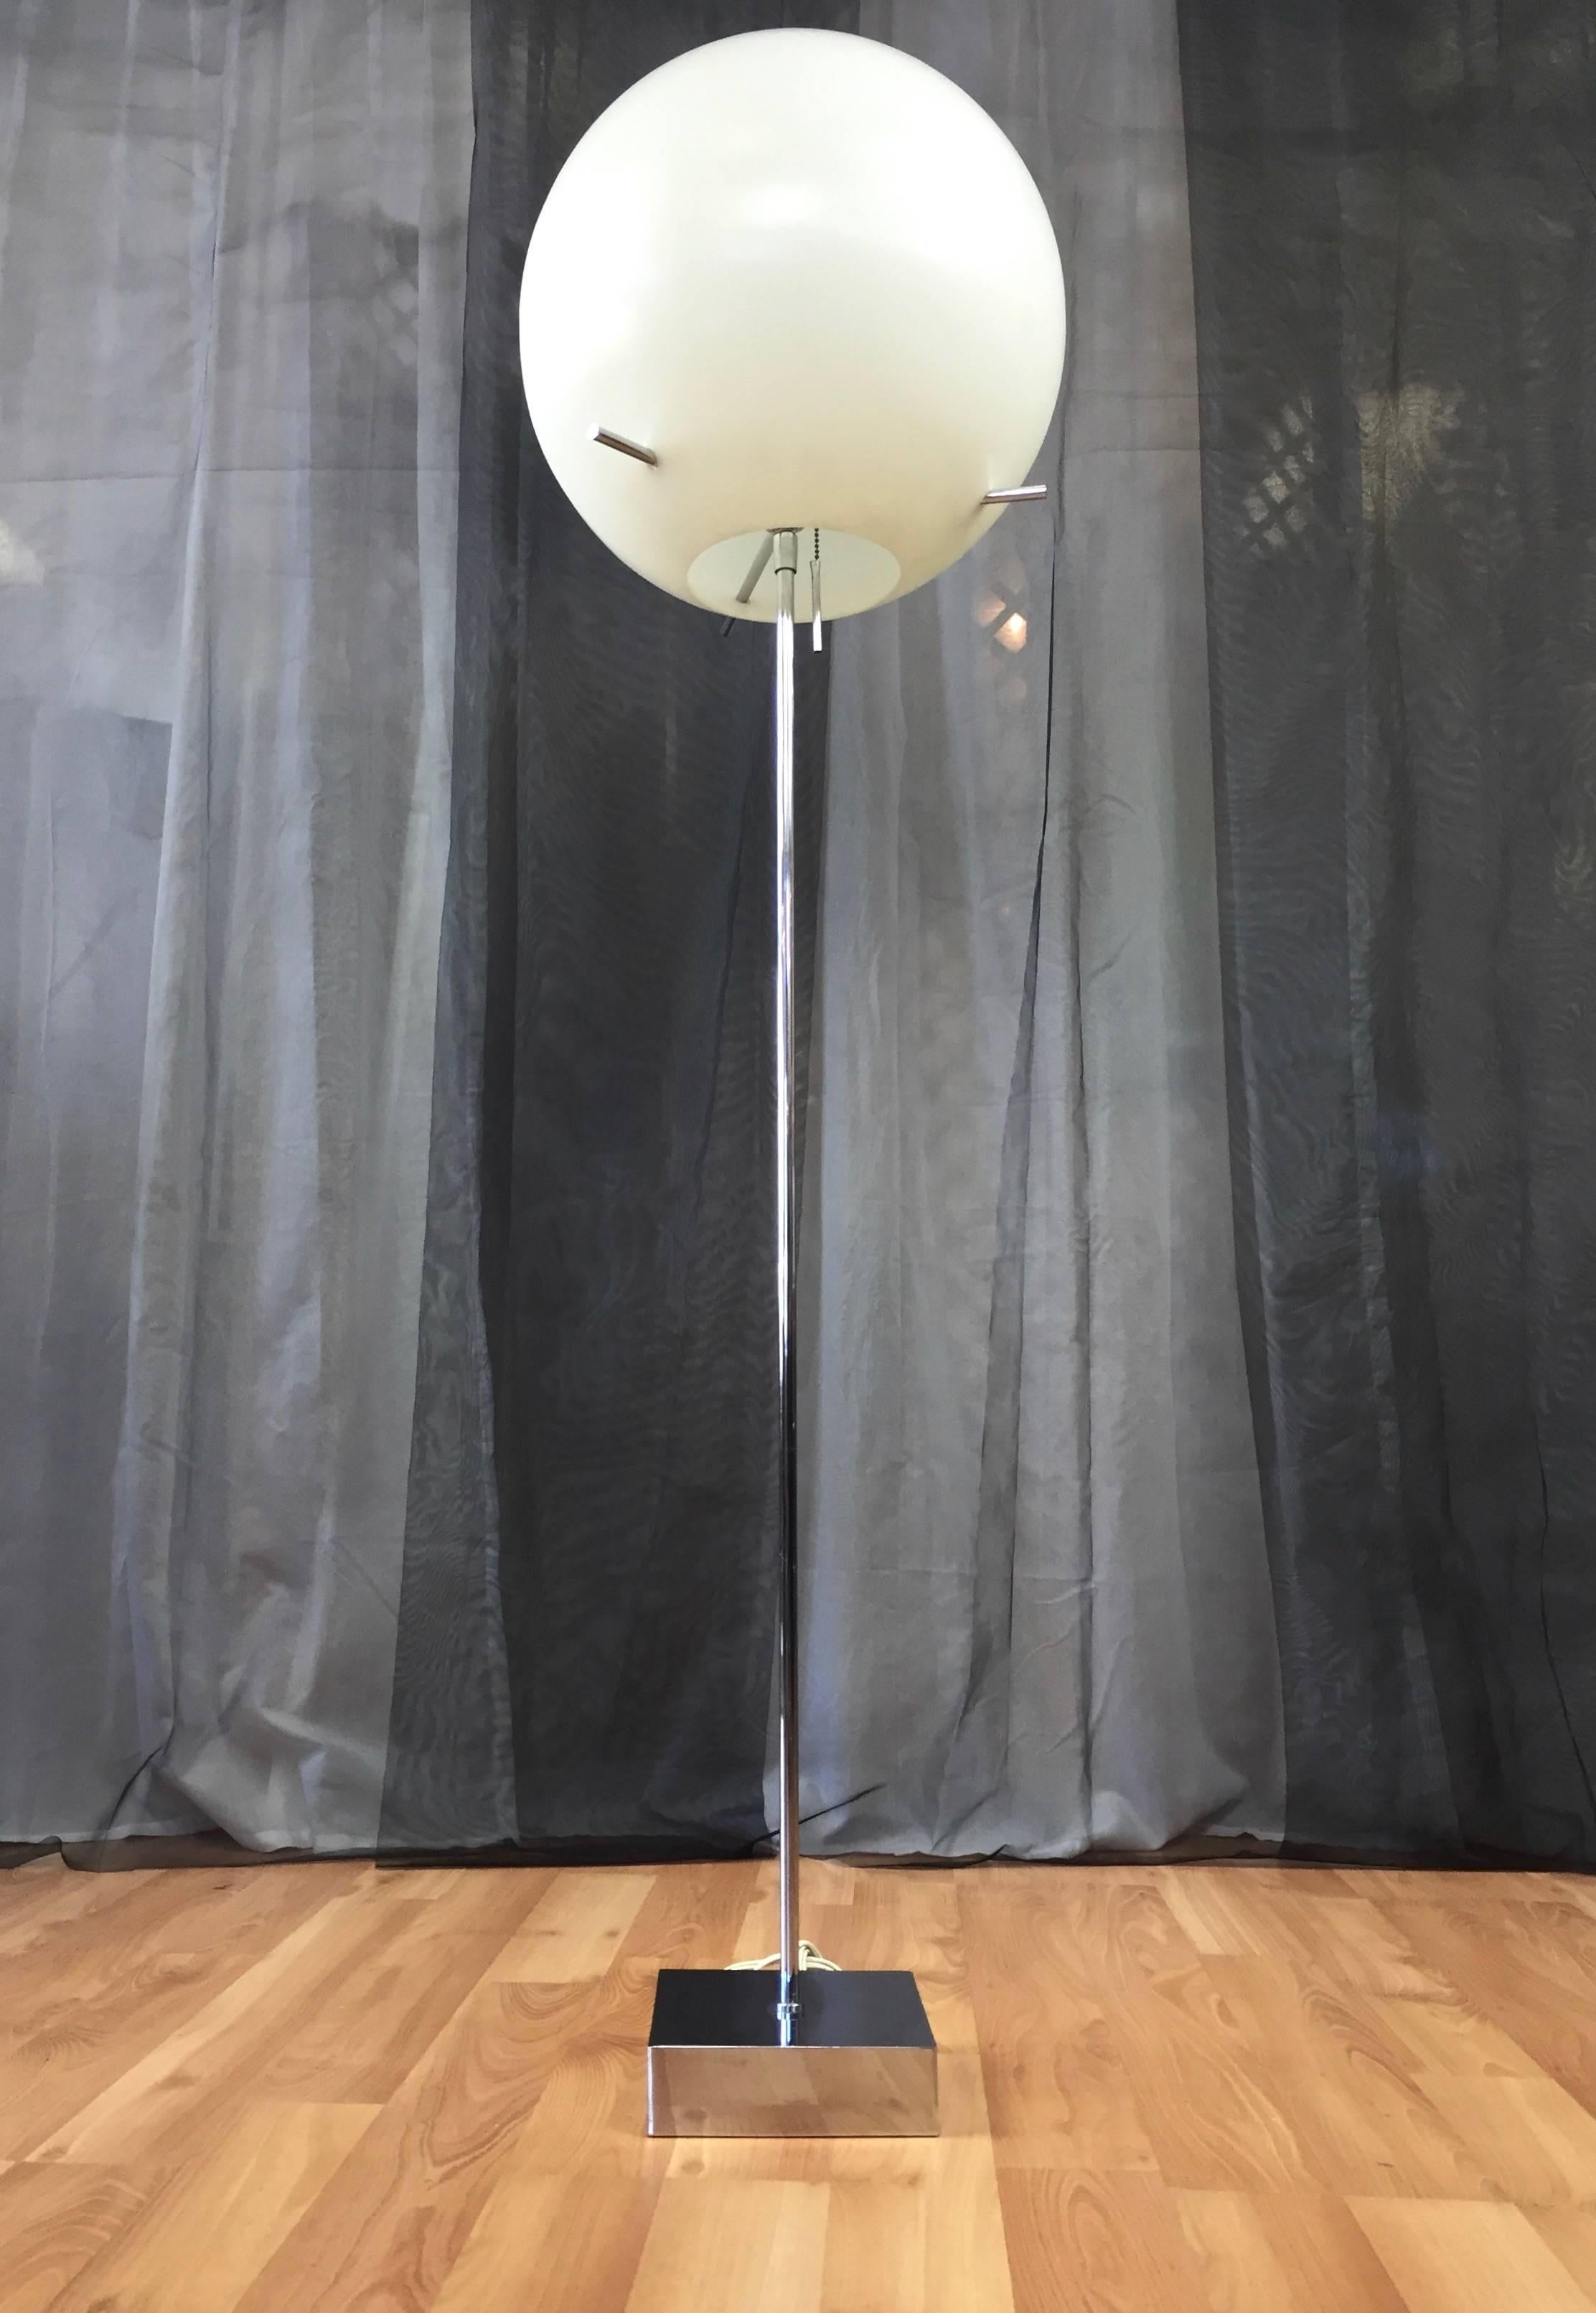 An ultra-modern chrome floor lamp with white globe shade by Paul Mayen for Habitat.

Minimalist mirror-finish base and stem support an oversized balloon like plastic globe shade. A trio of chrome rods pierce the shade’s side, and serve as handles